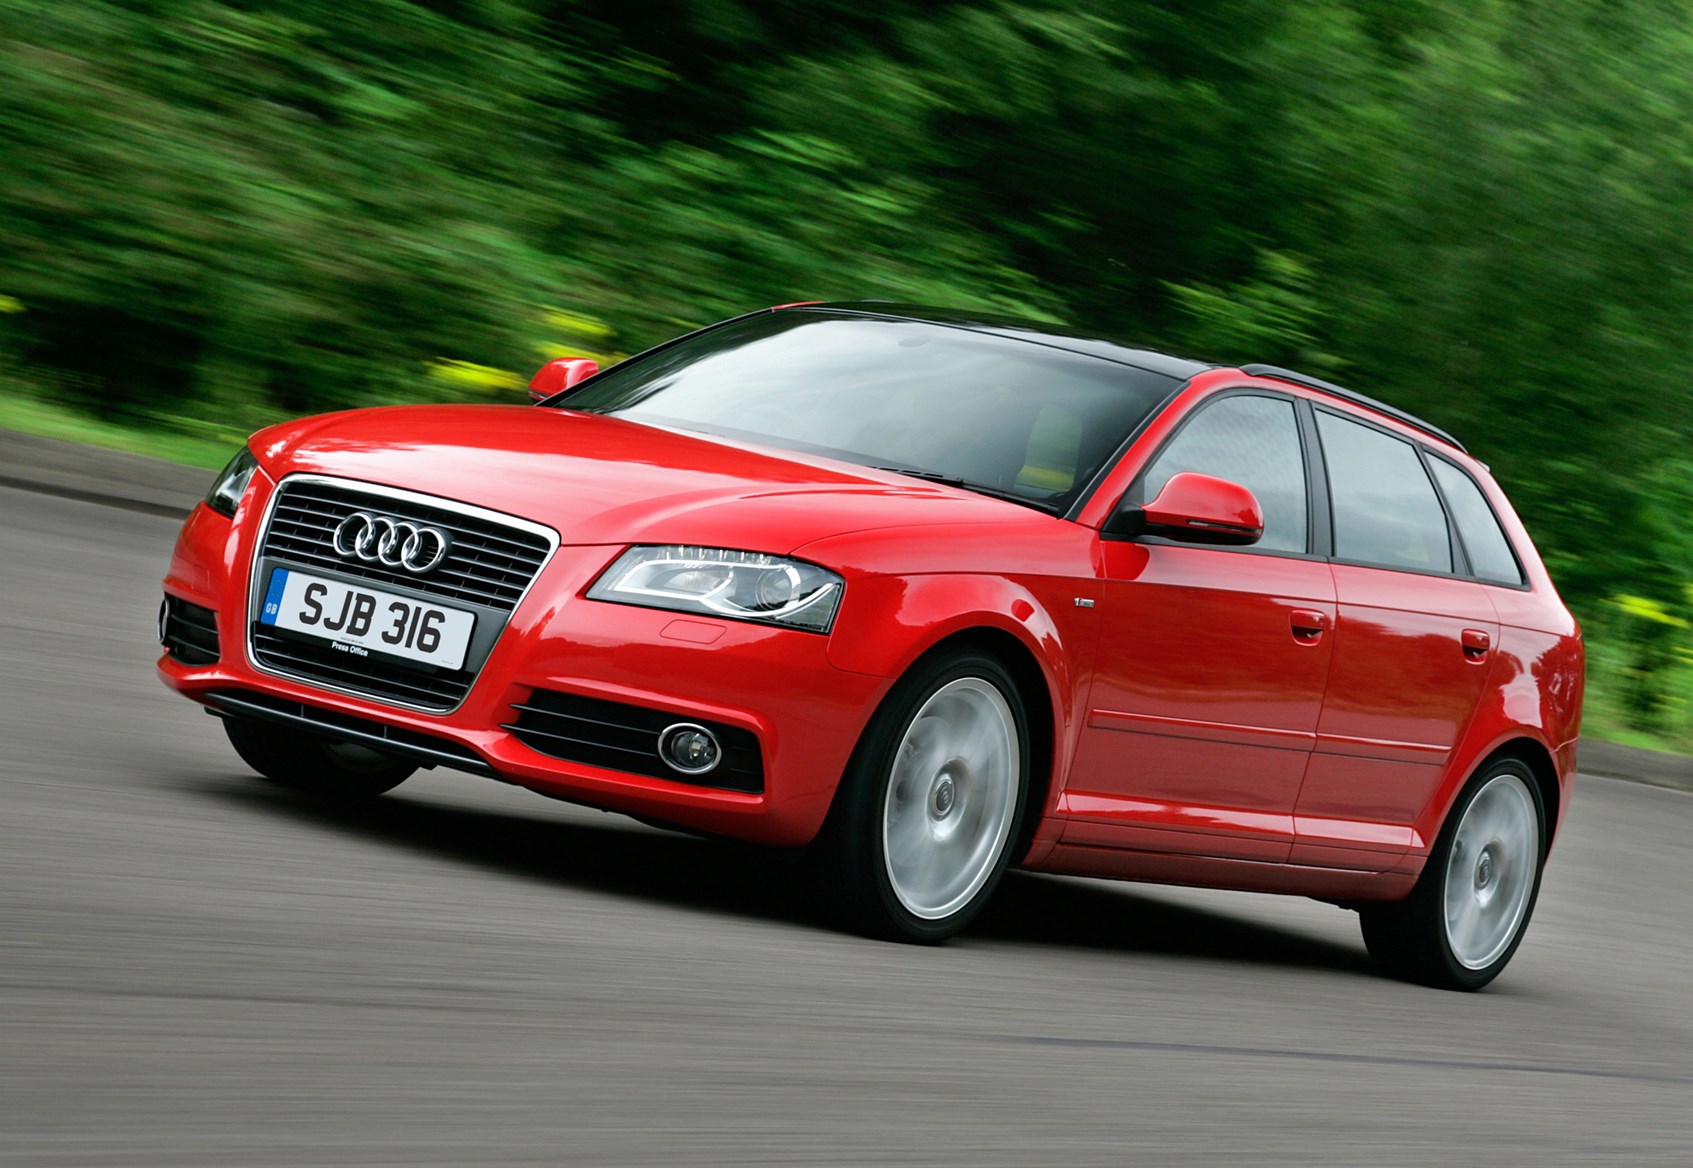 Used A3 Sportback (2004 - Review | Parkers